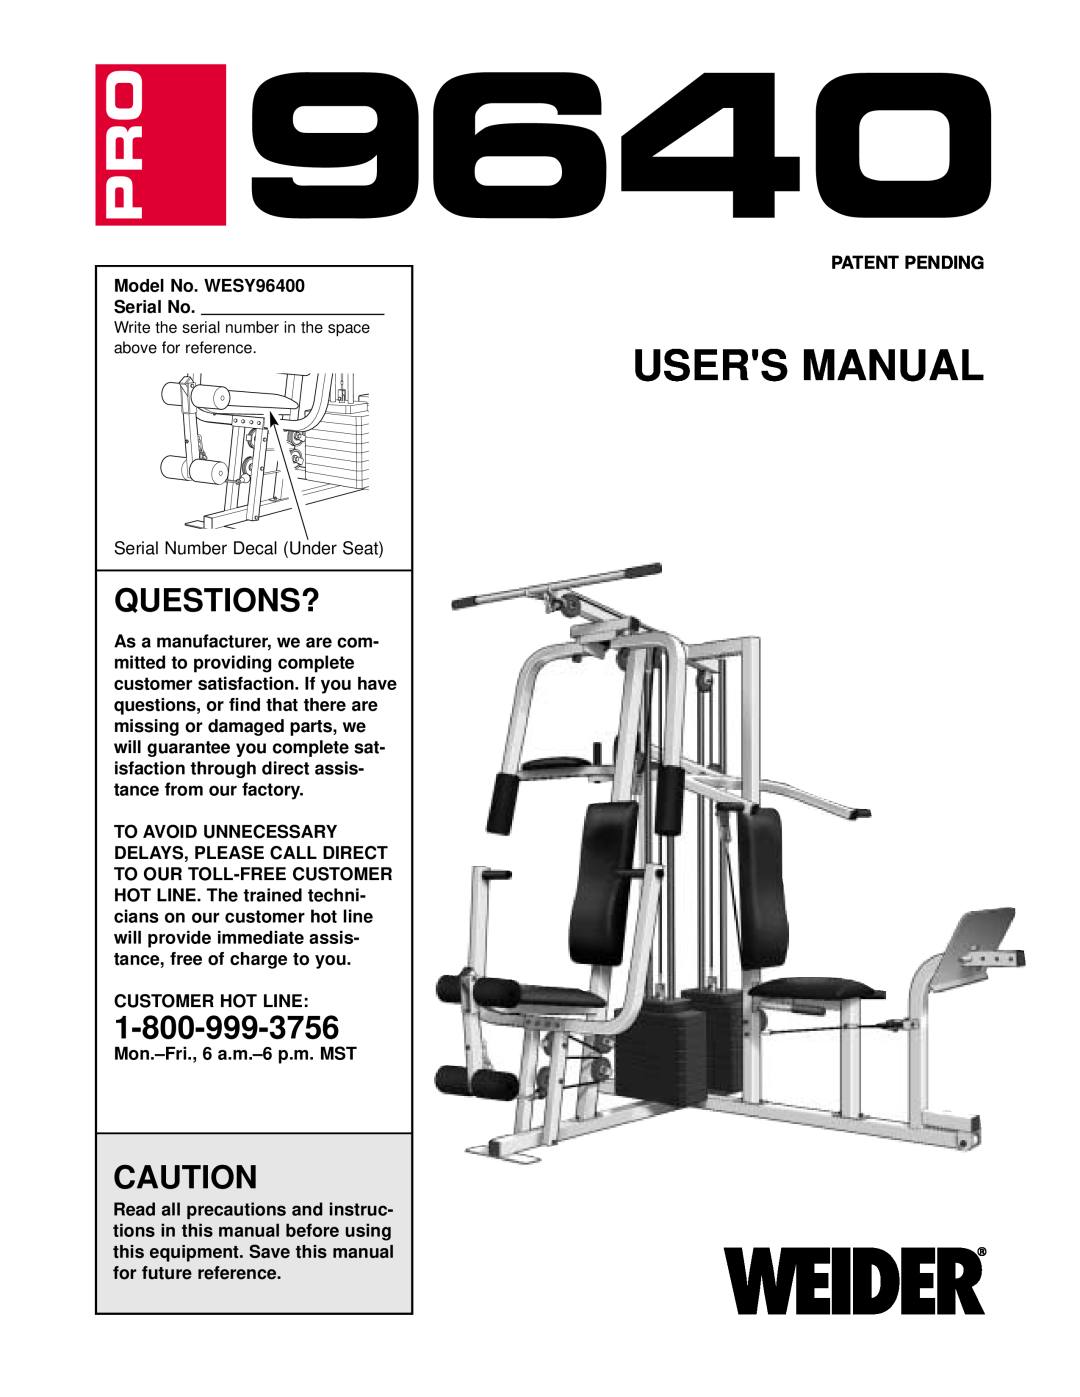 Weider WESY96400 user manual Questions?, Users Manual 